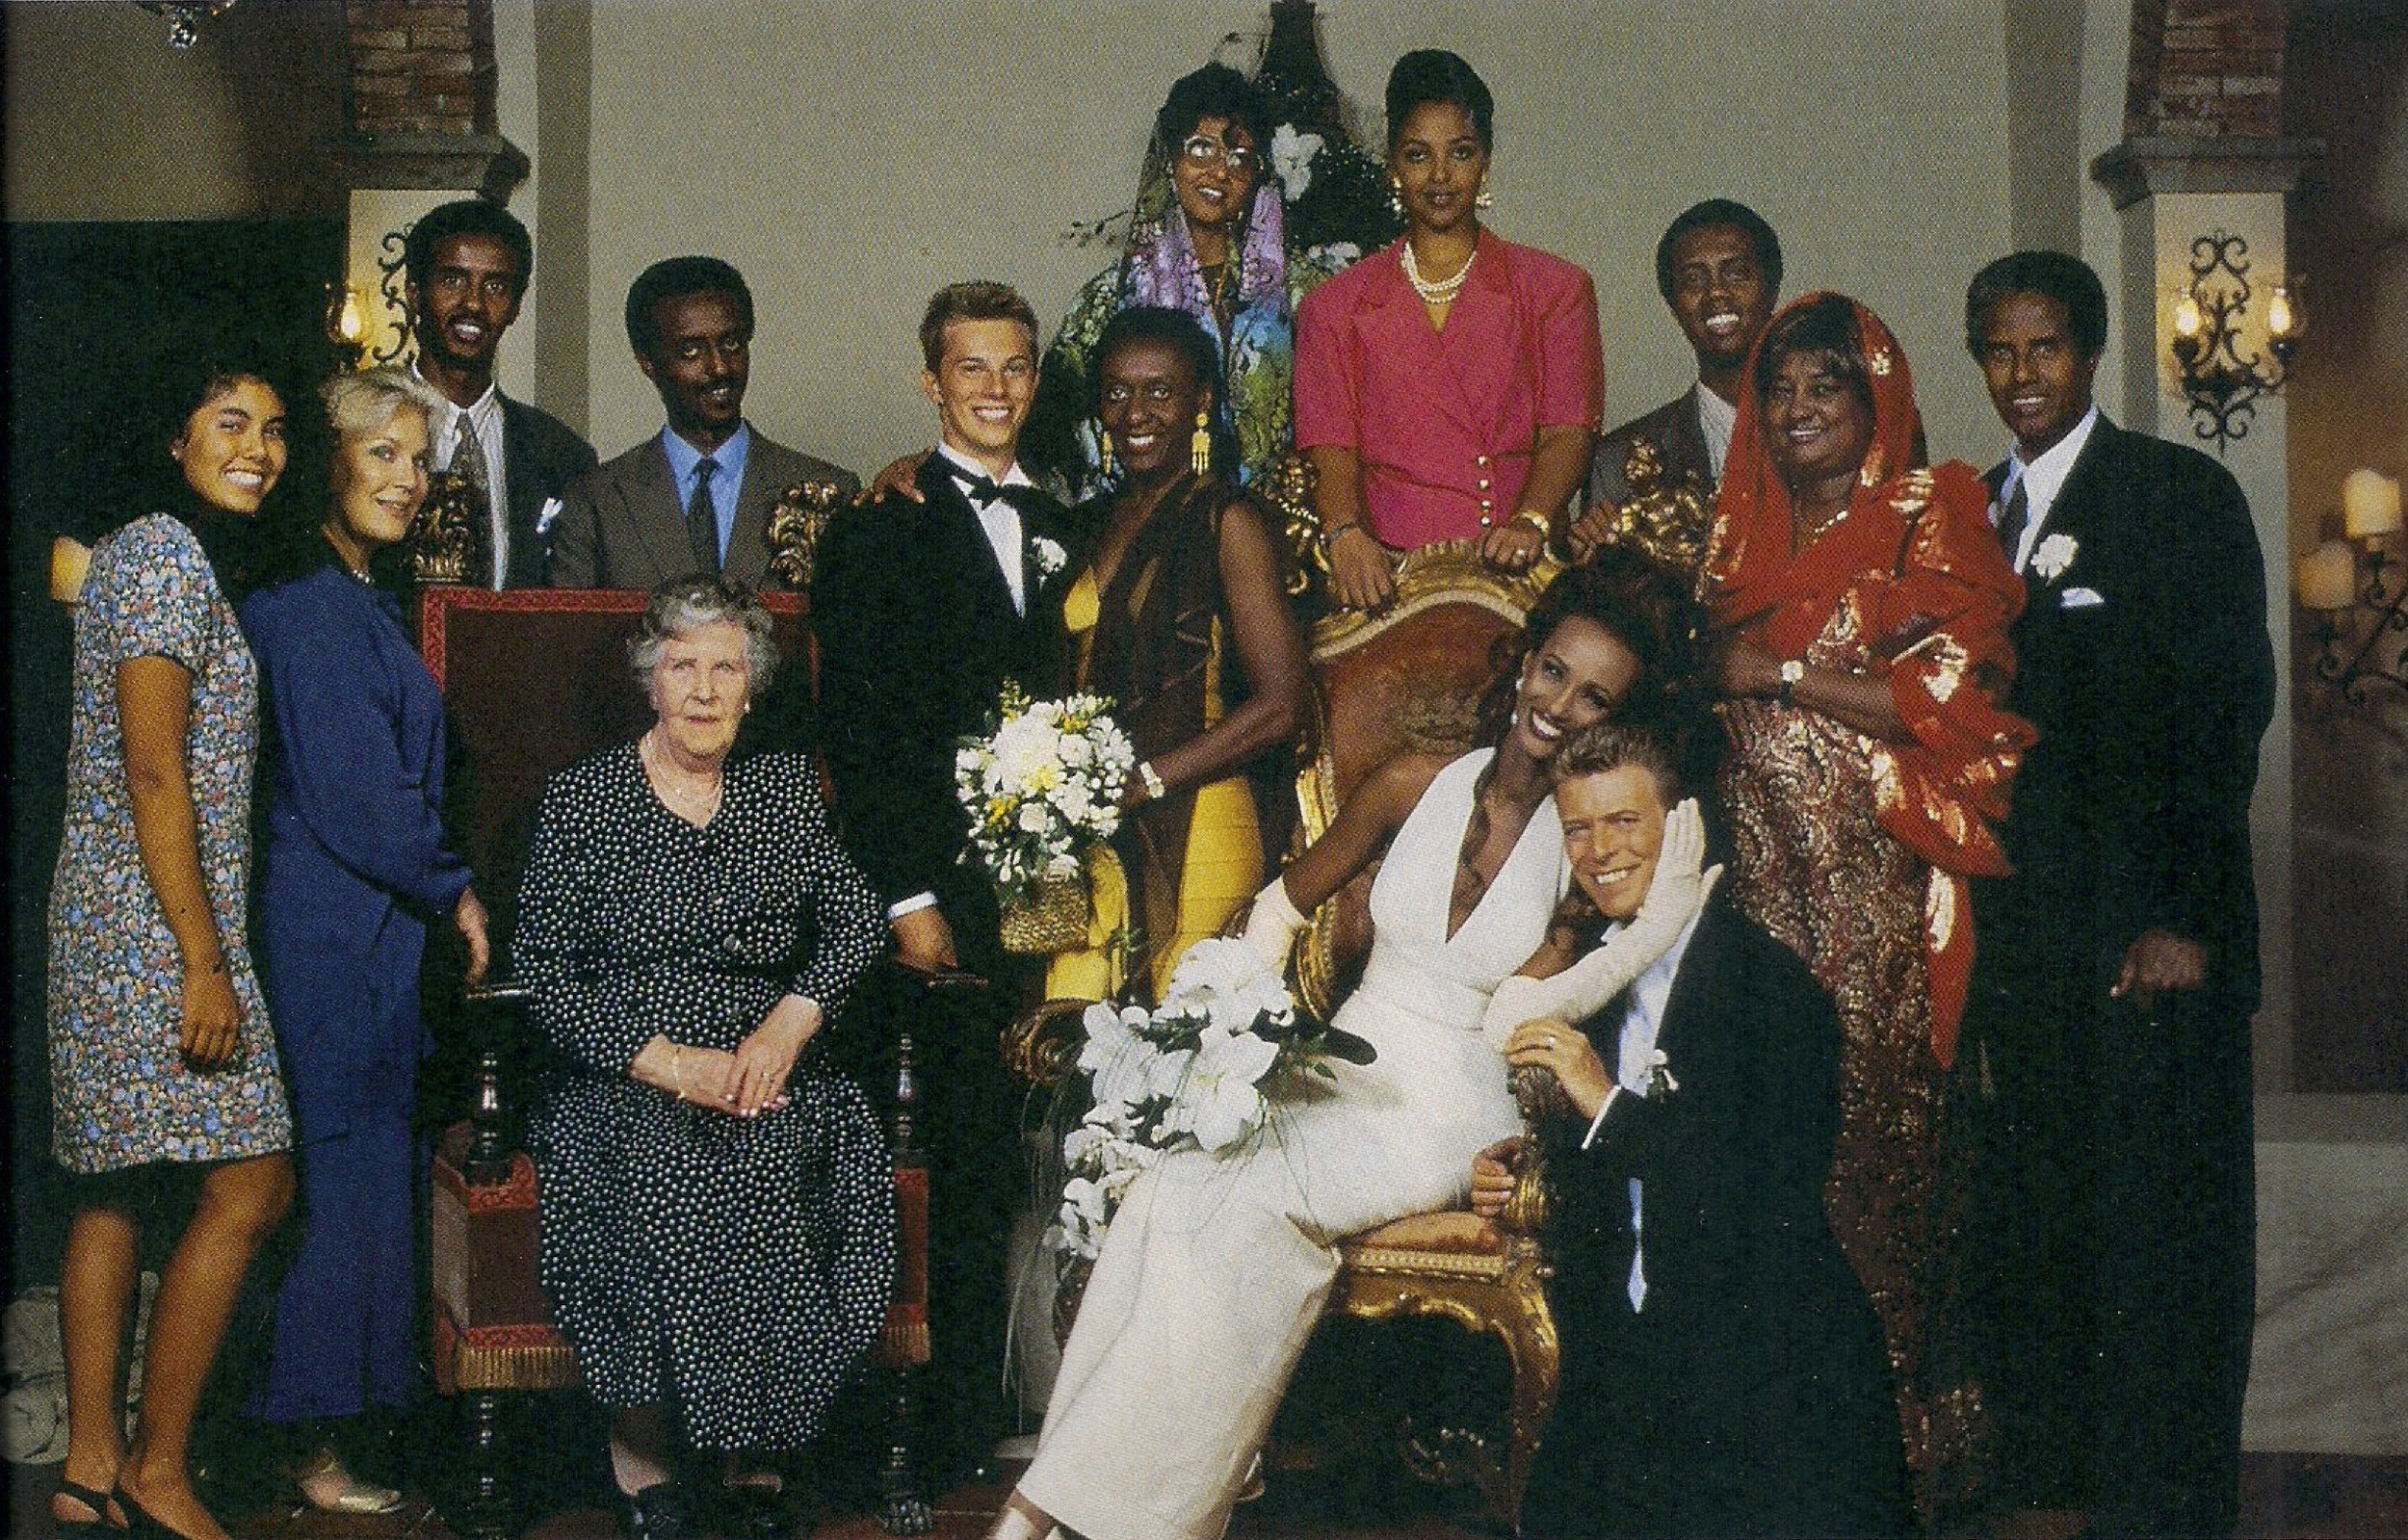 Maid of Honor at Iman + David Bowie's Wedding, June 1992